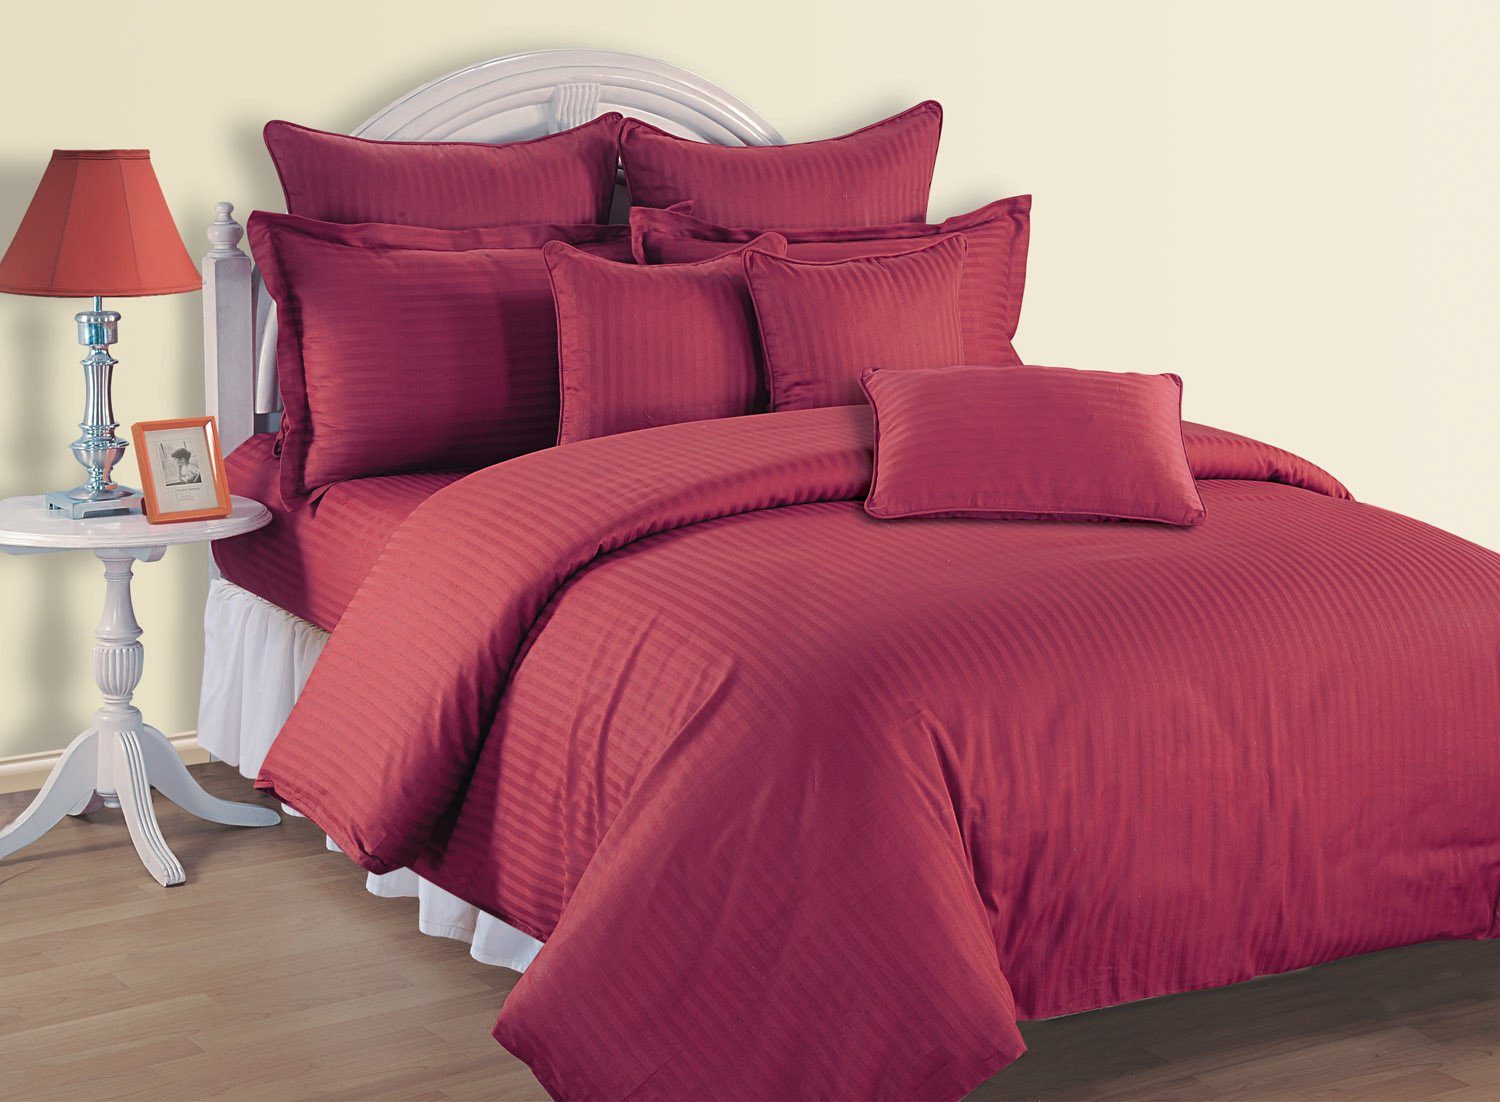 MYSTIC MAROON DUVET COVERS - Flickdeal.co.nz